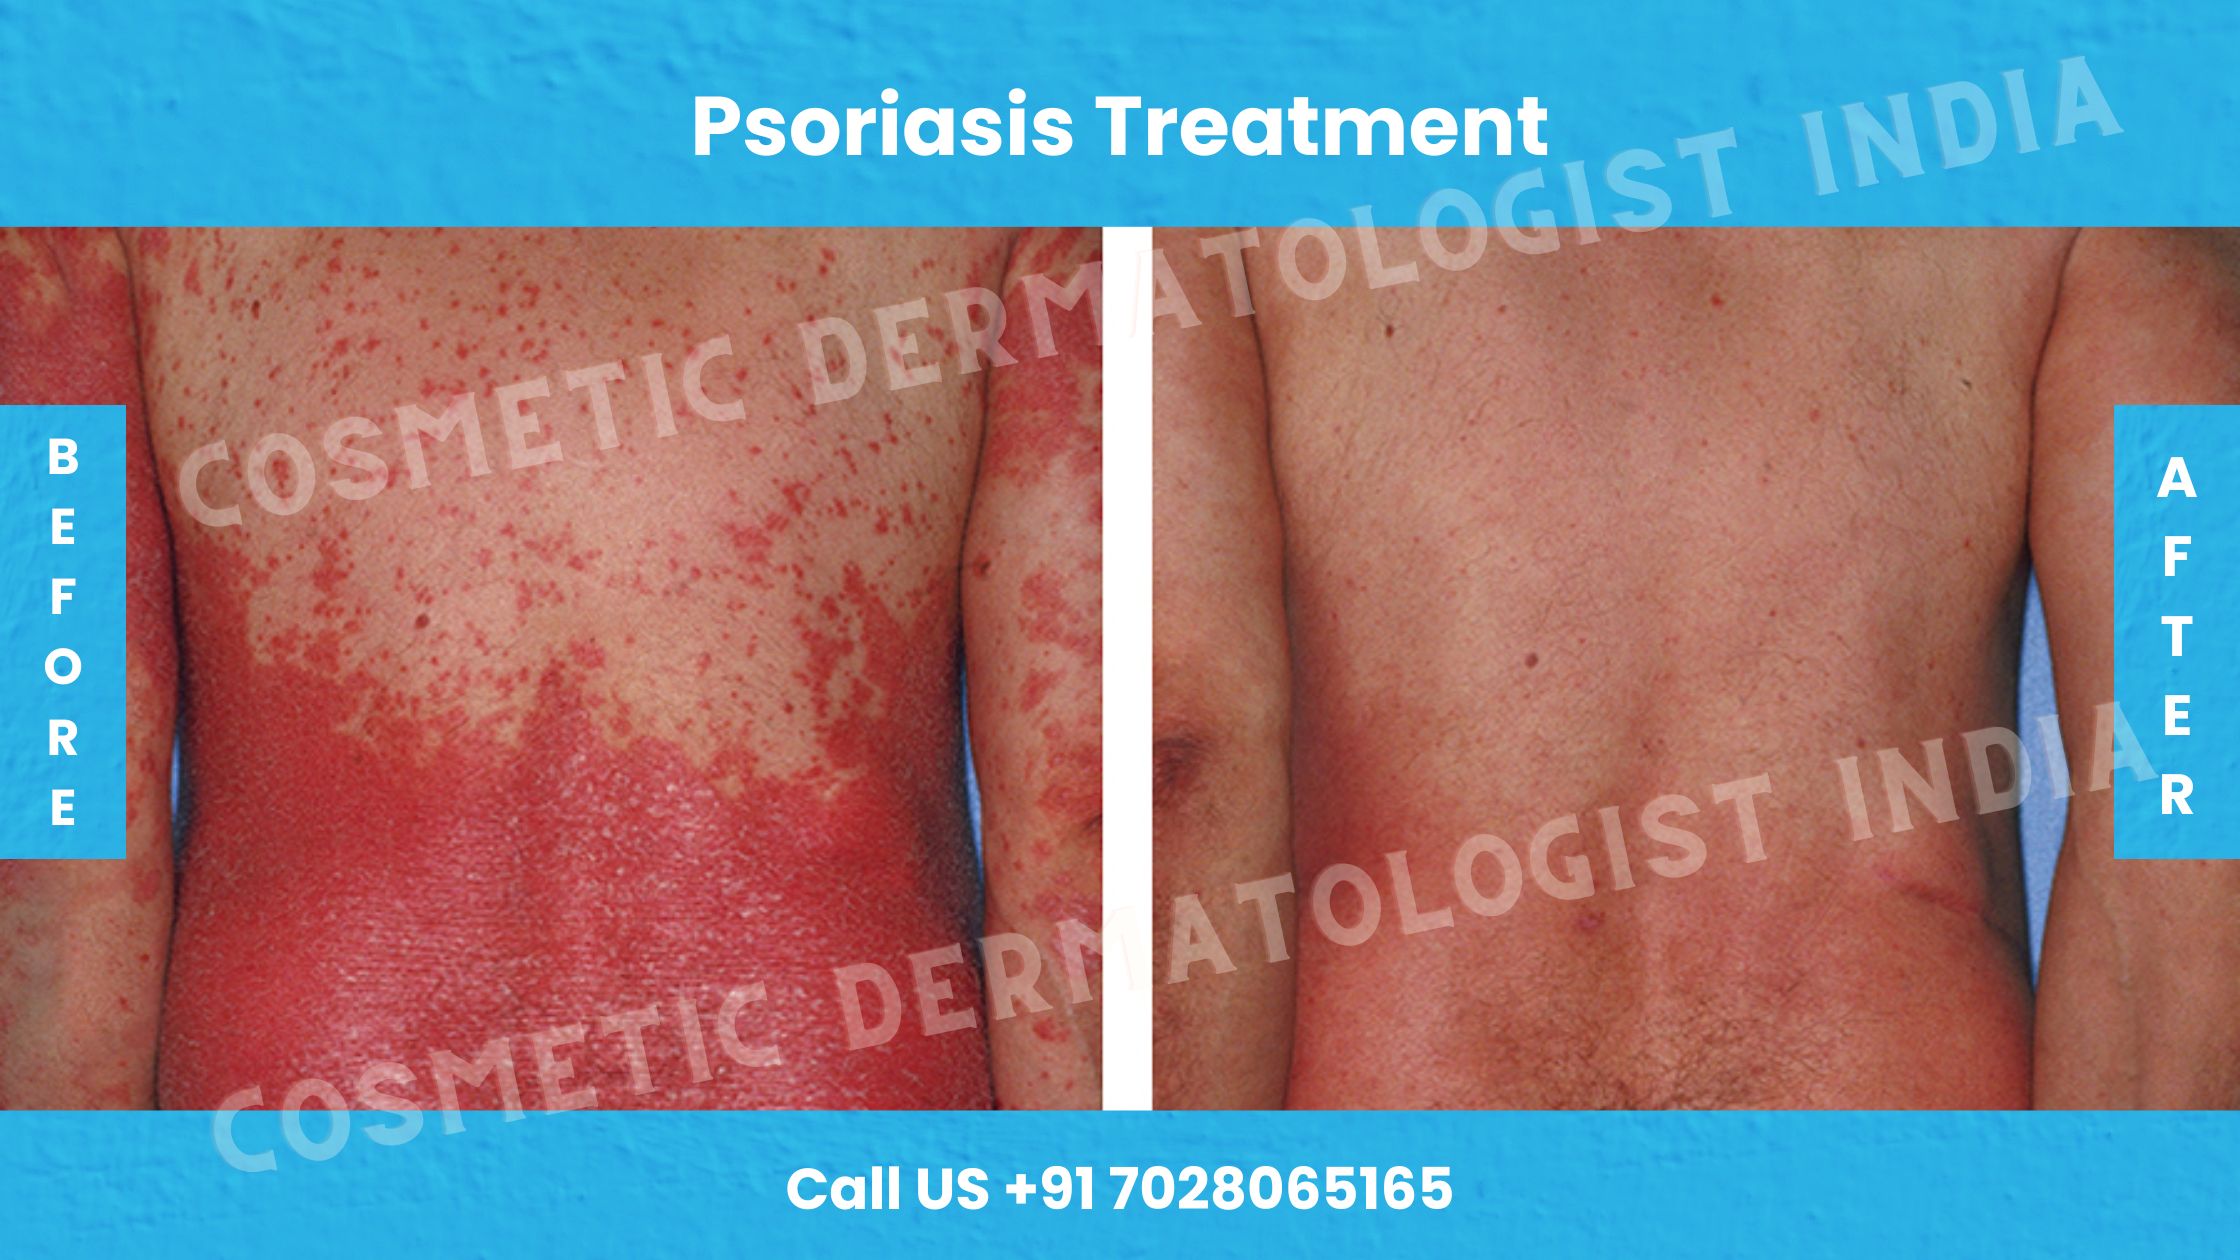 Before and After Photos For Psoriasis Treatment 